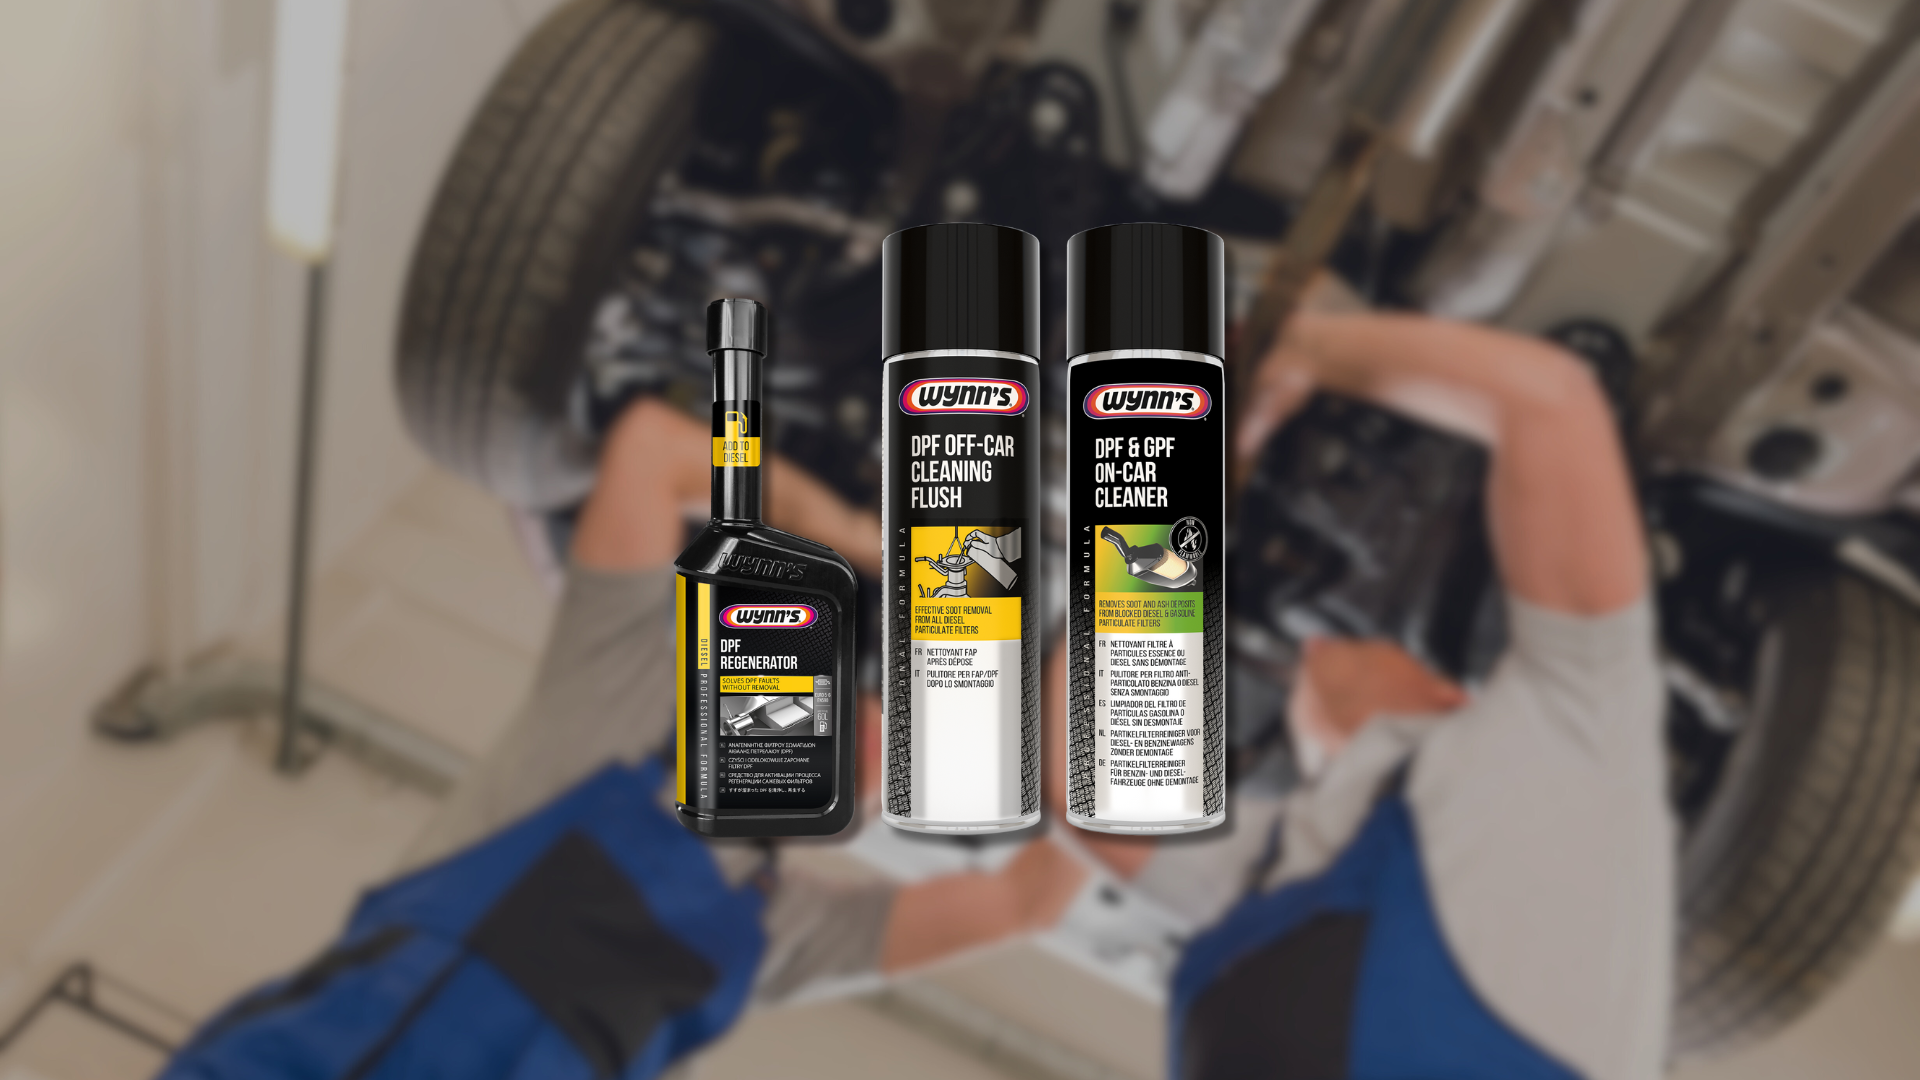 Off-Car DPF Cleaner